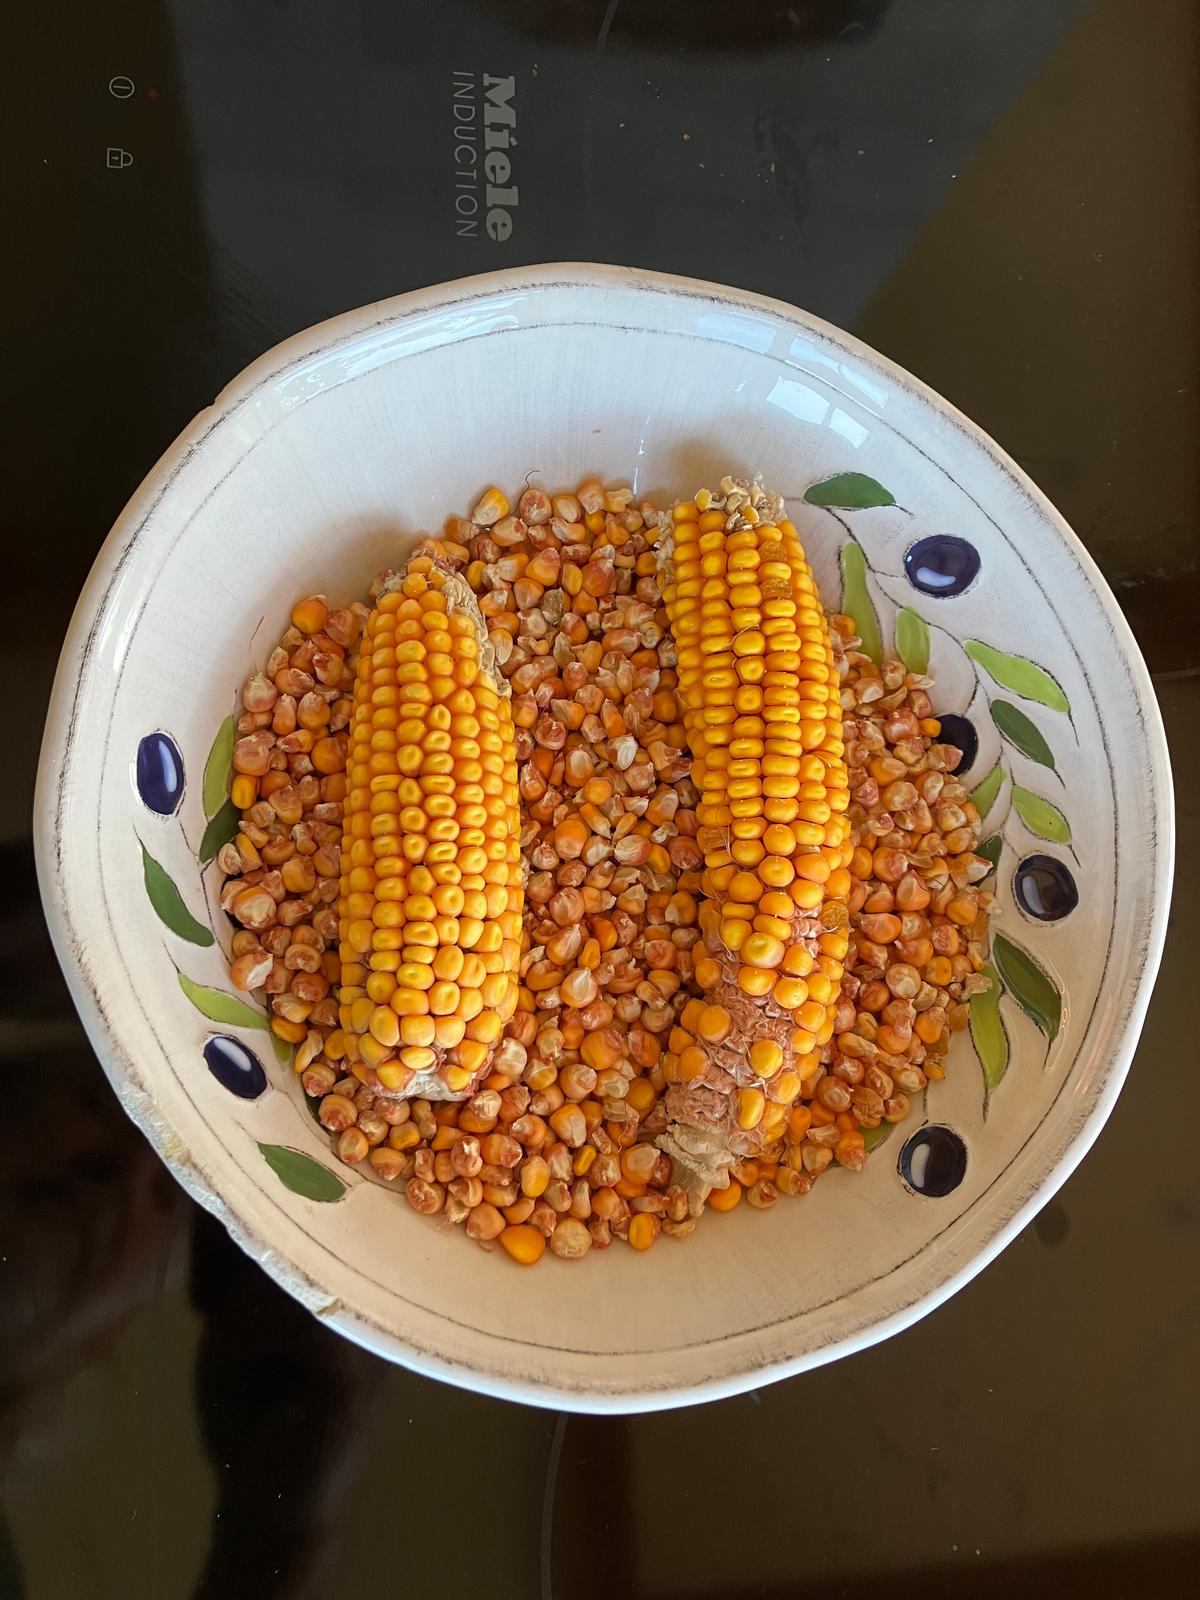 Heirloom corn from the author's 2022 harvest. (Eric Lucas)